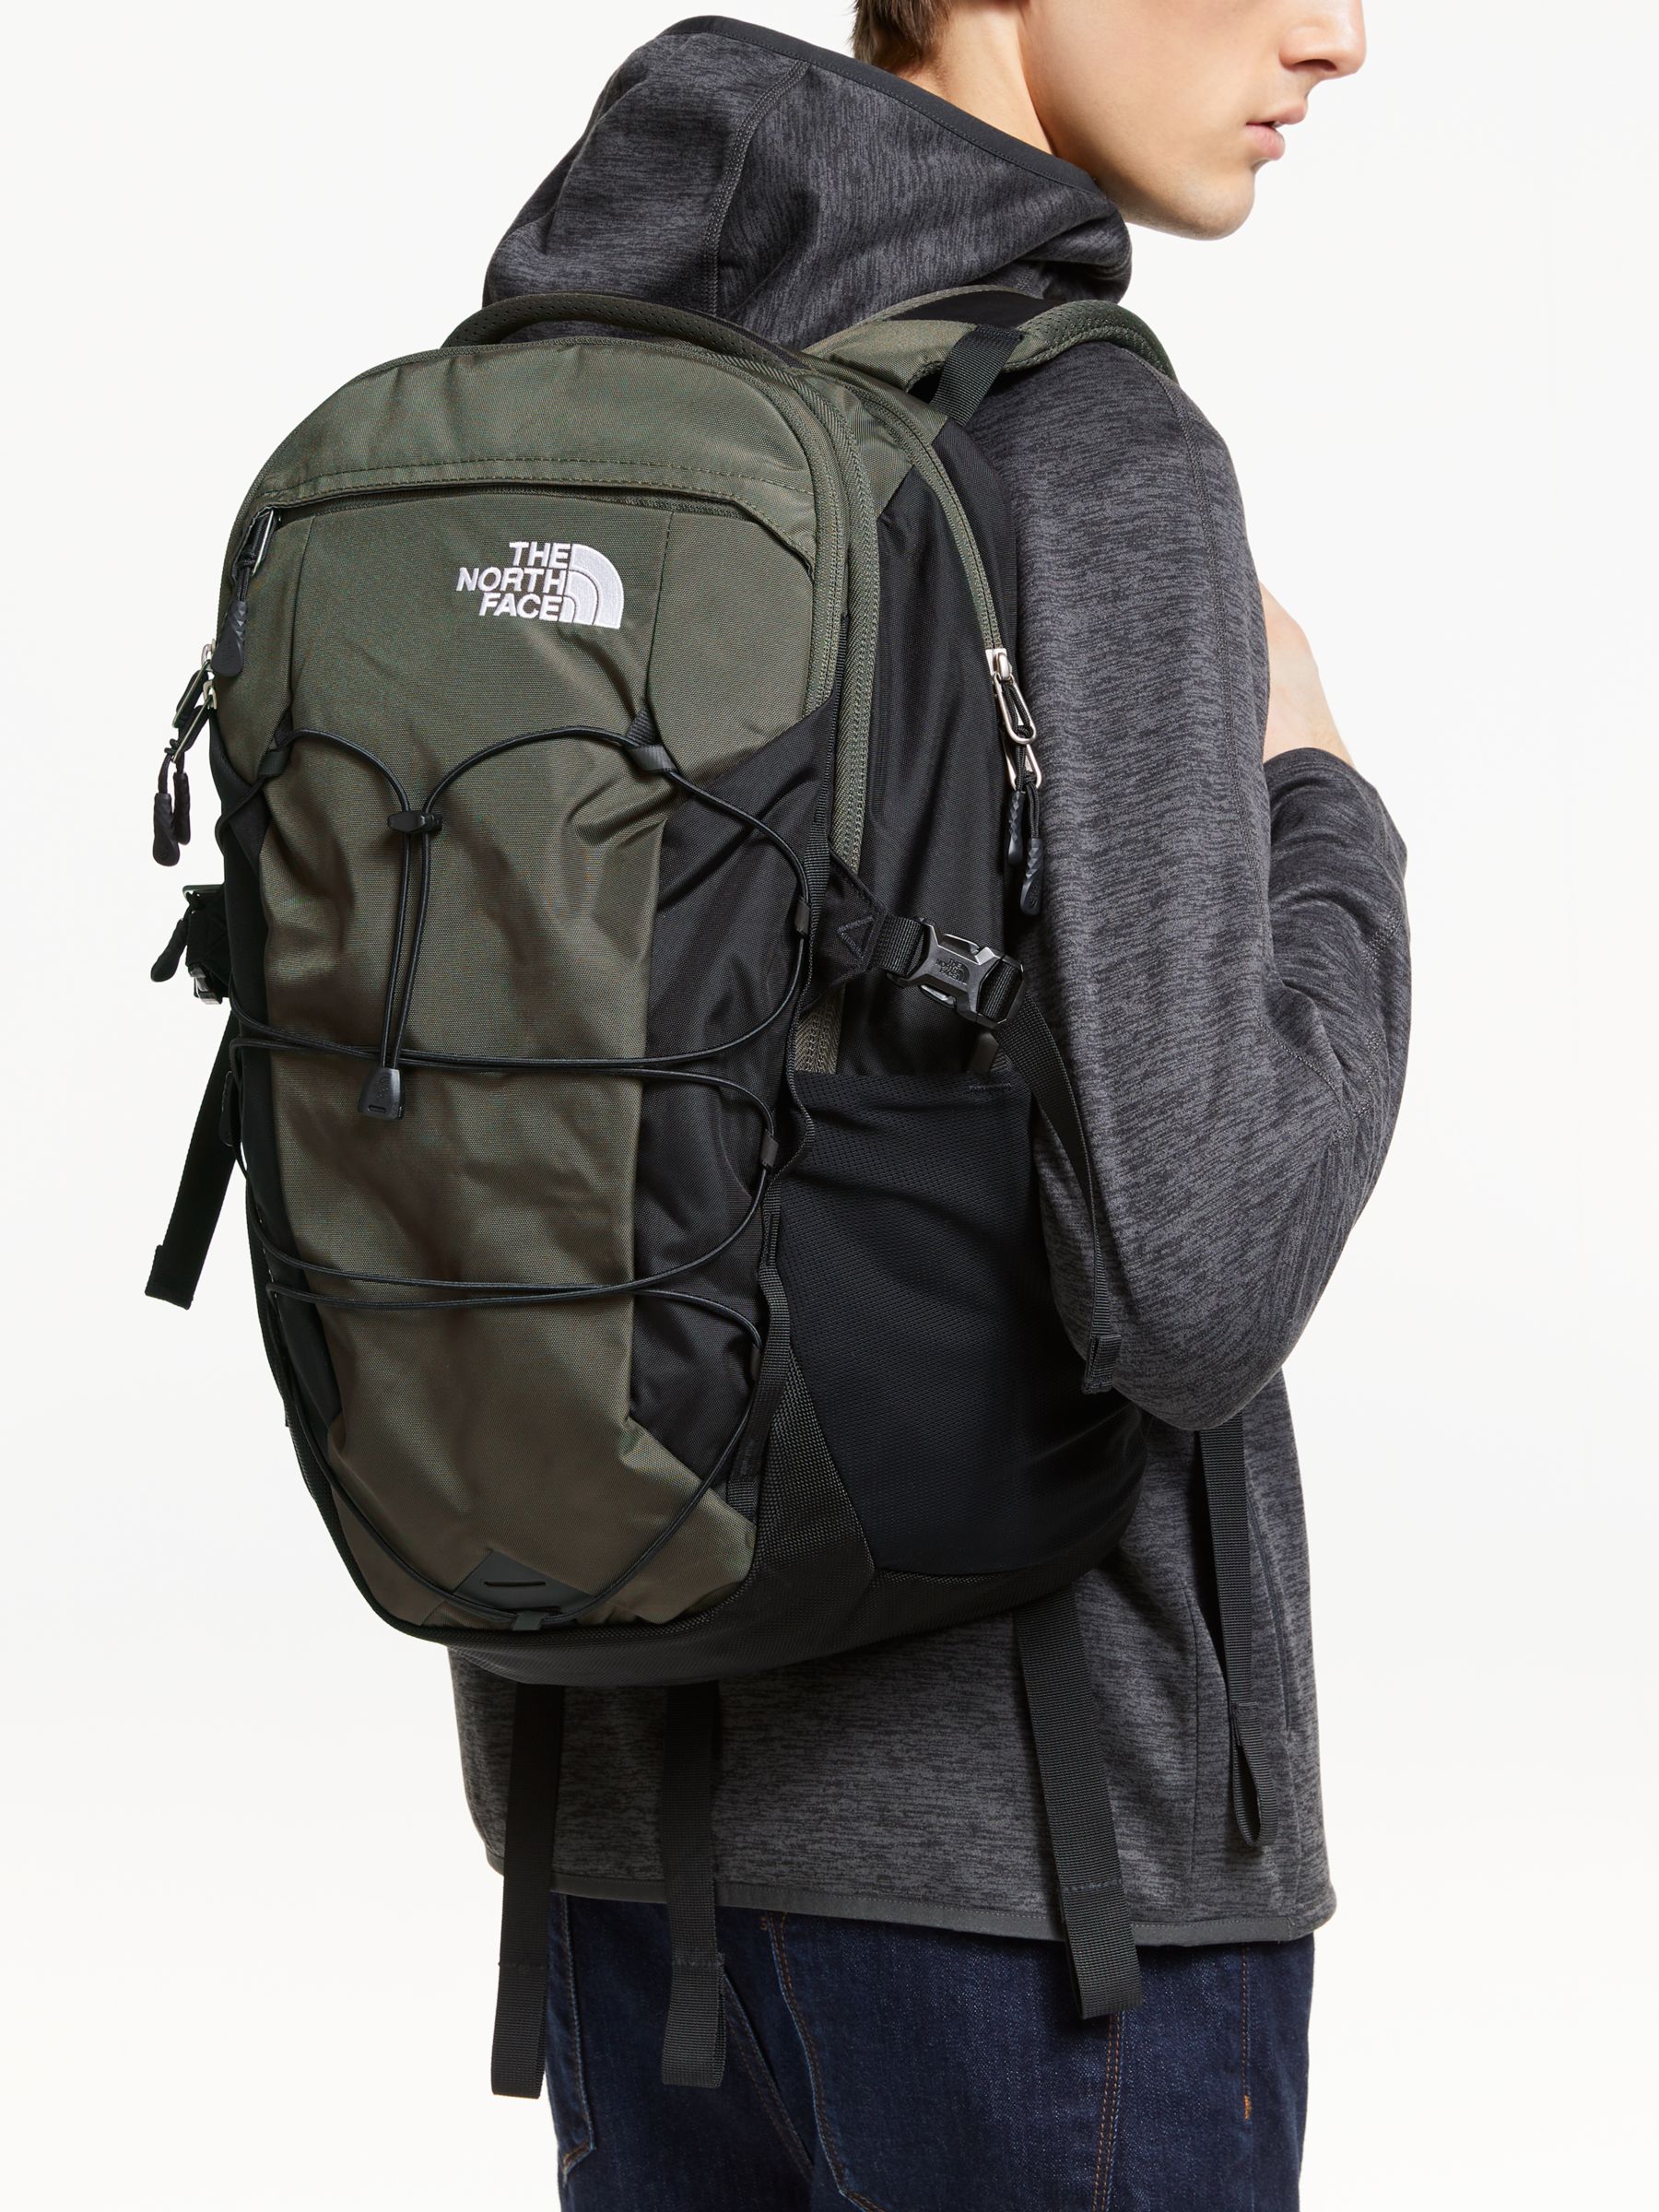 The North Face Borealis Backpack, New 